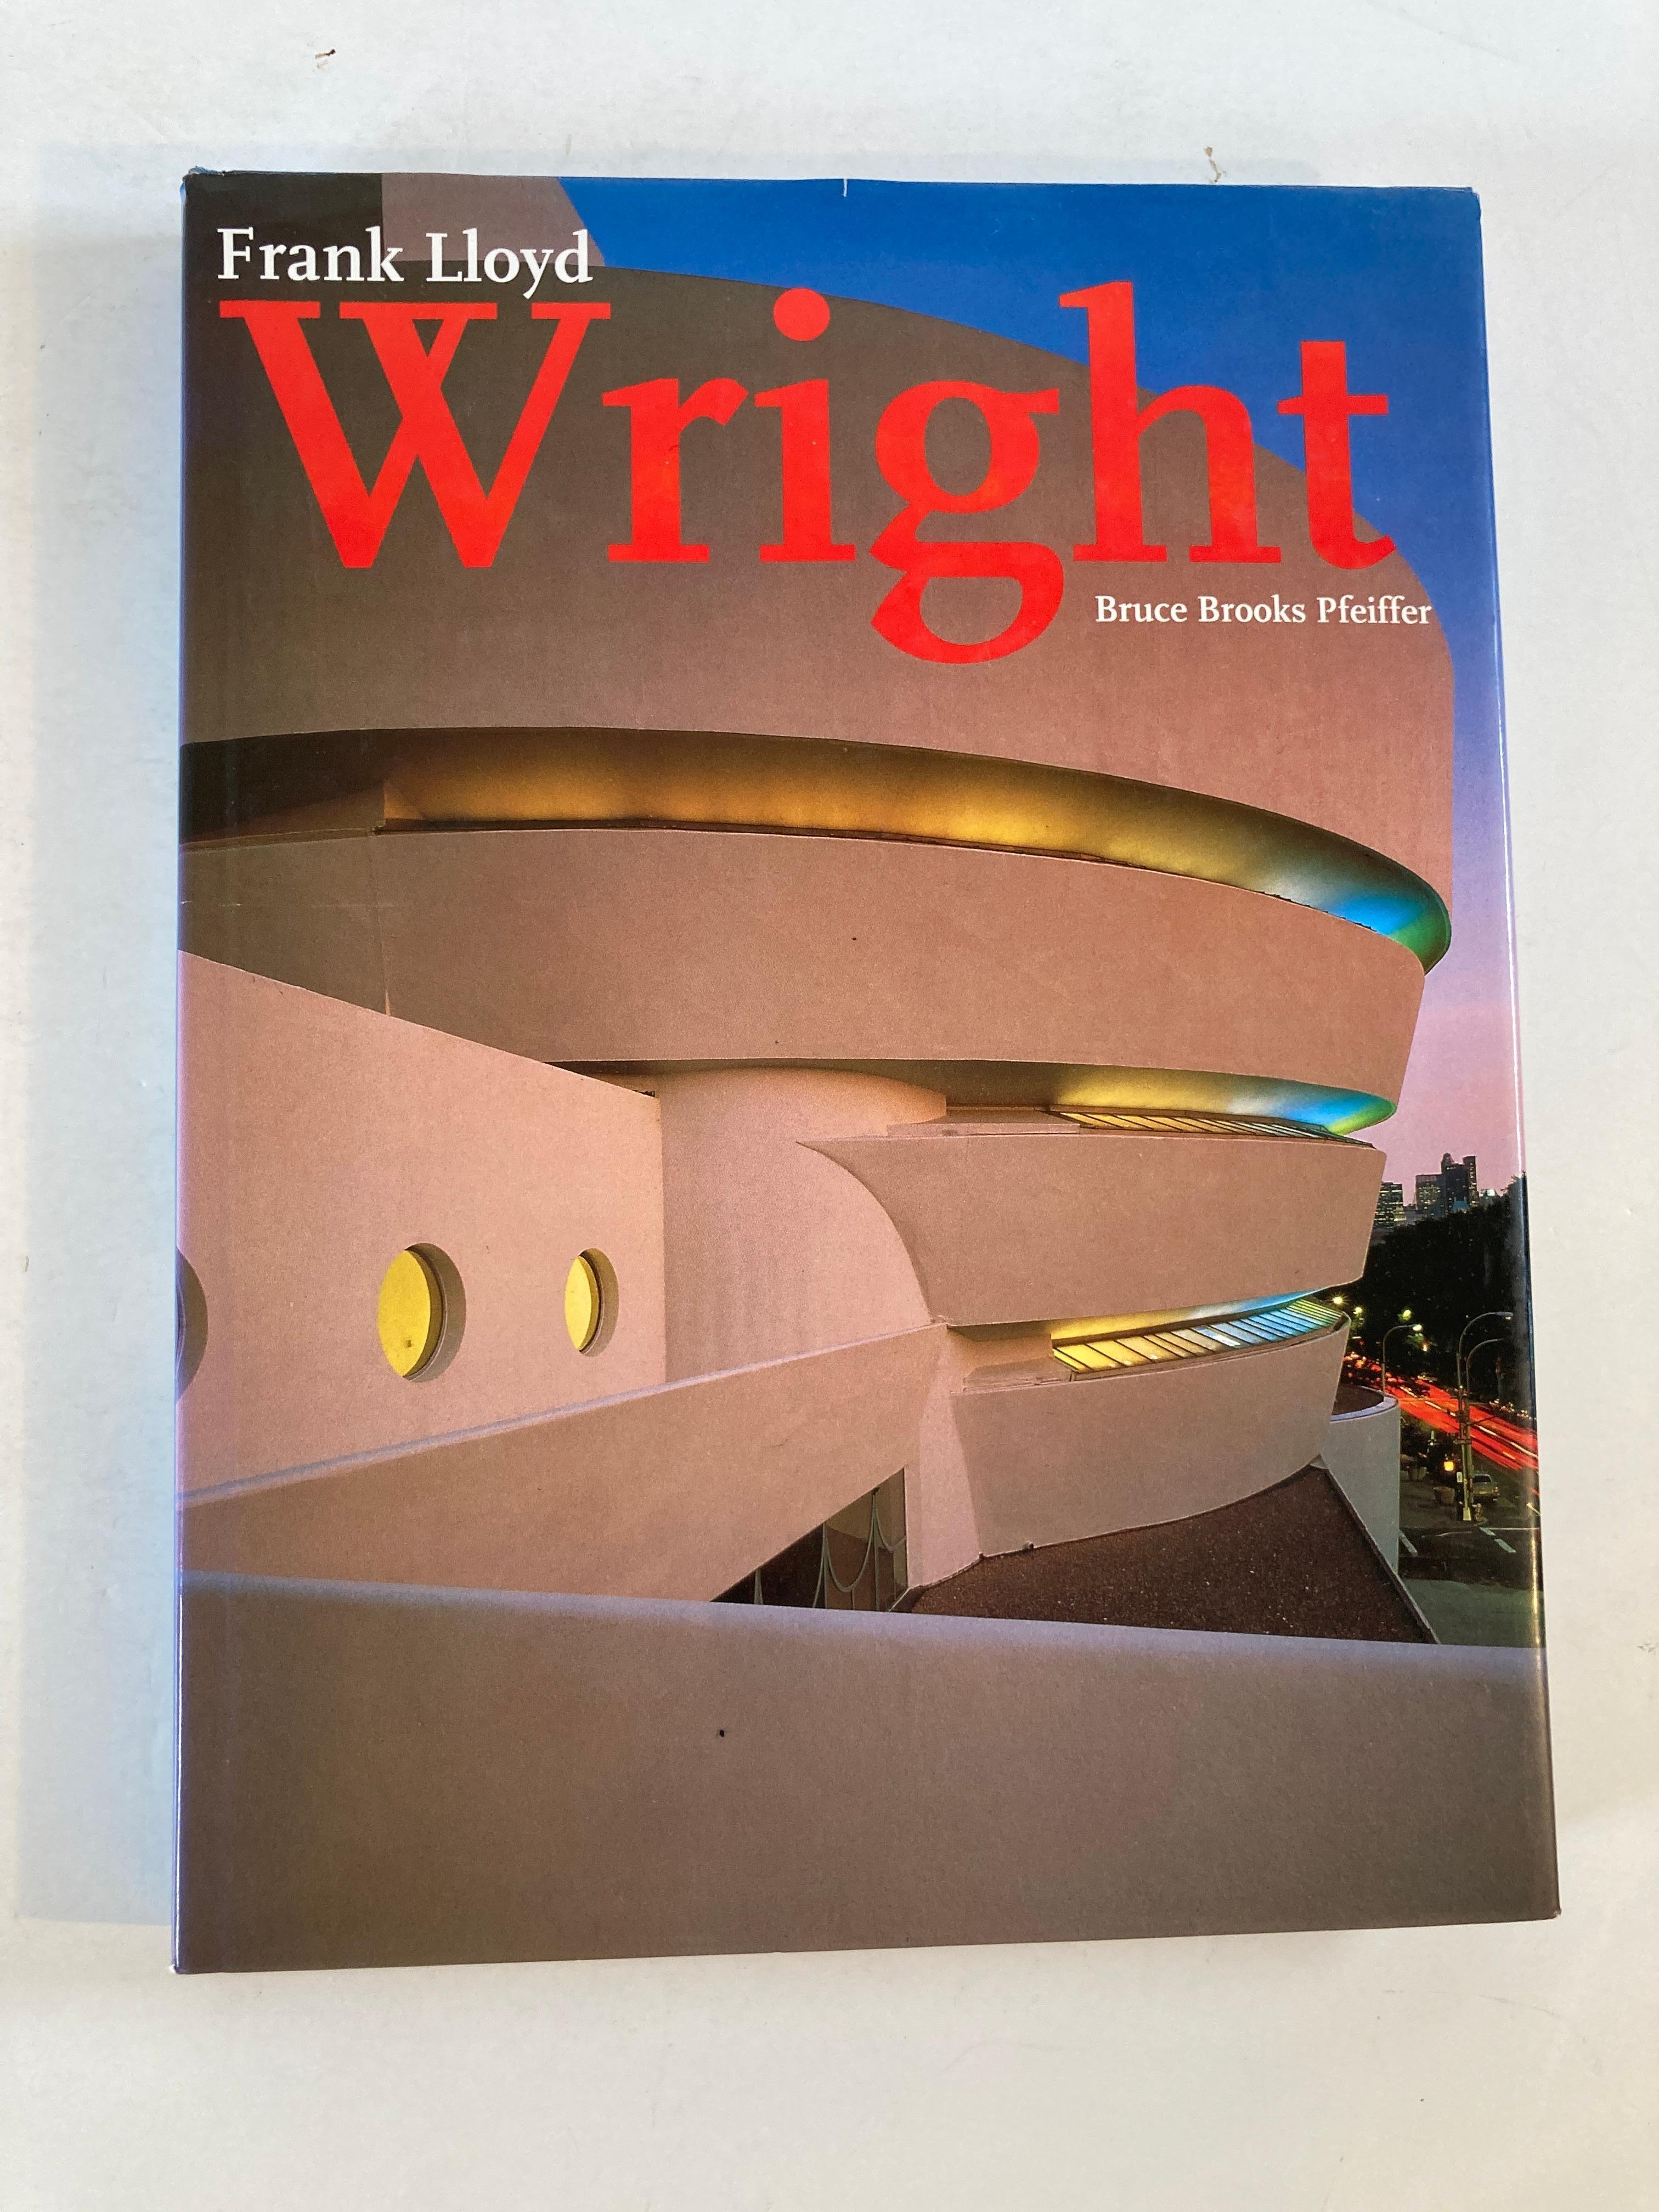 Frank Lloyd Wright by Bruce-brooks-pfeiffer. Hardcover book.
Published by Barnes Noble Books (1994).
A building by Frank Lloyd Wright (1867-1959) is at once unmistakably individual, and evocative of an entire era. Notable for their exceptional